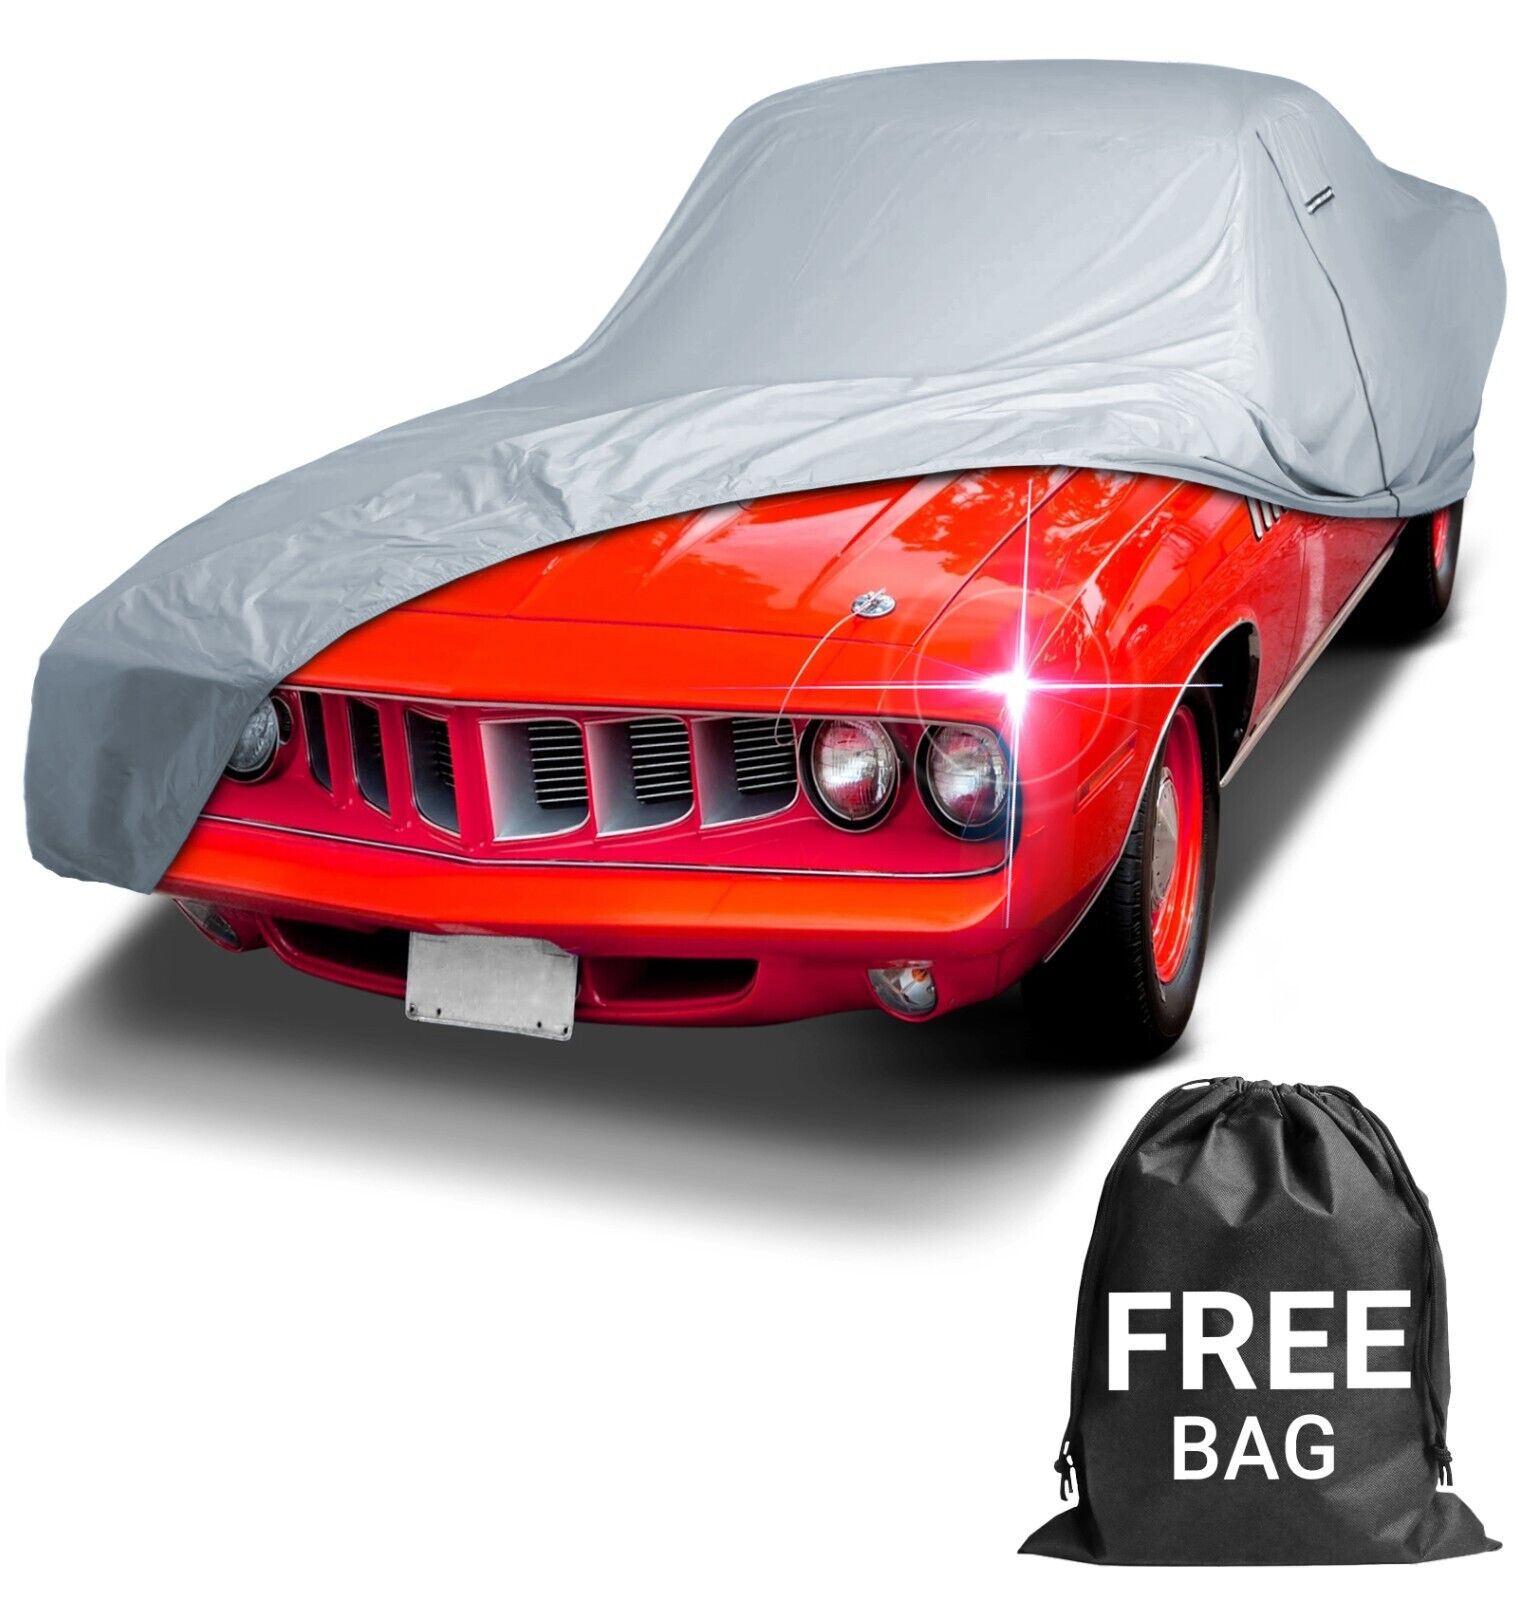 1967-1969 Plymouth Barracuda Custom Car Cover - All-Weather Waterproof Outdoor